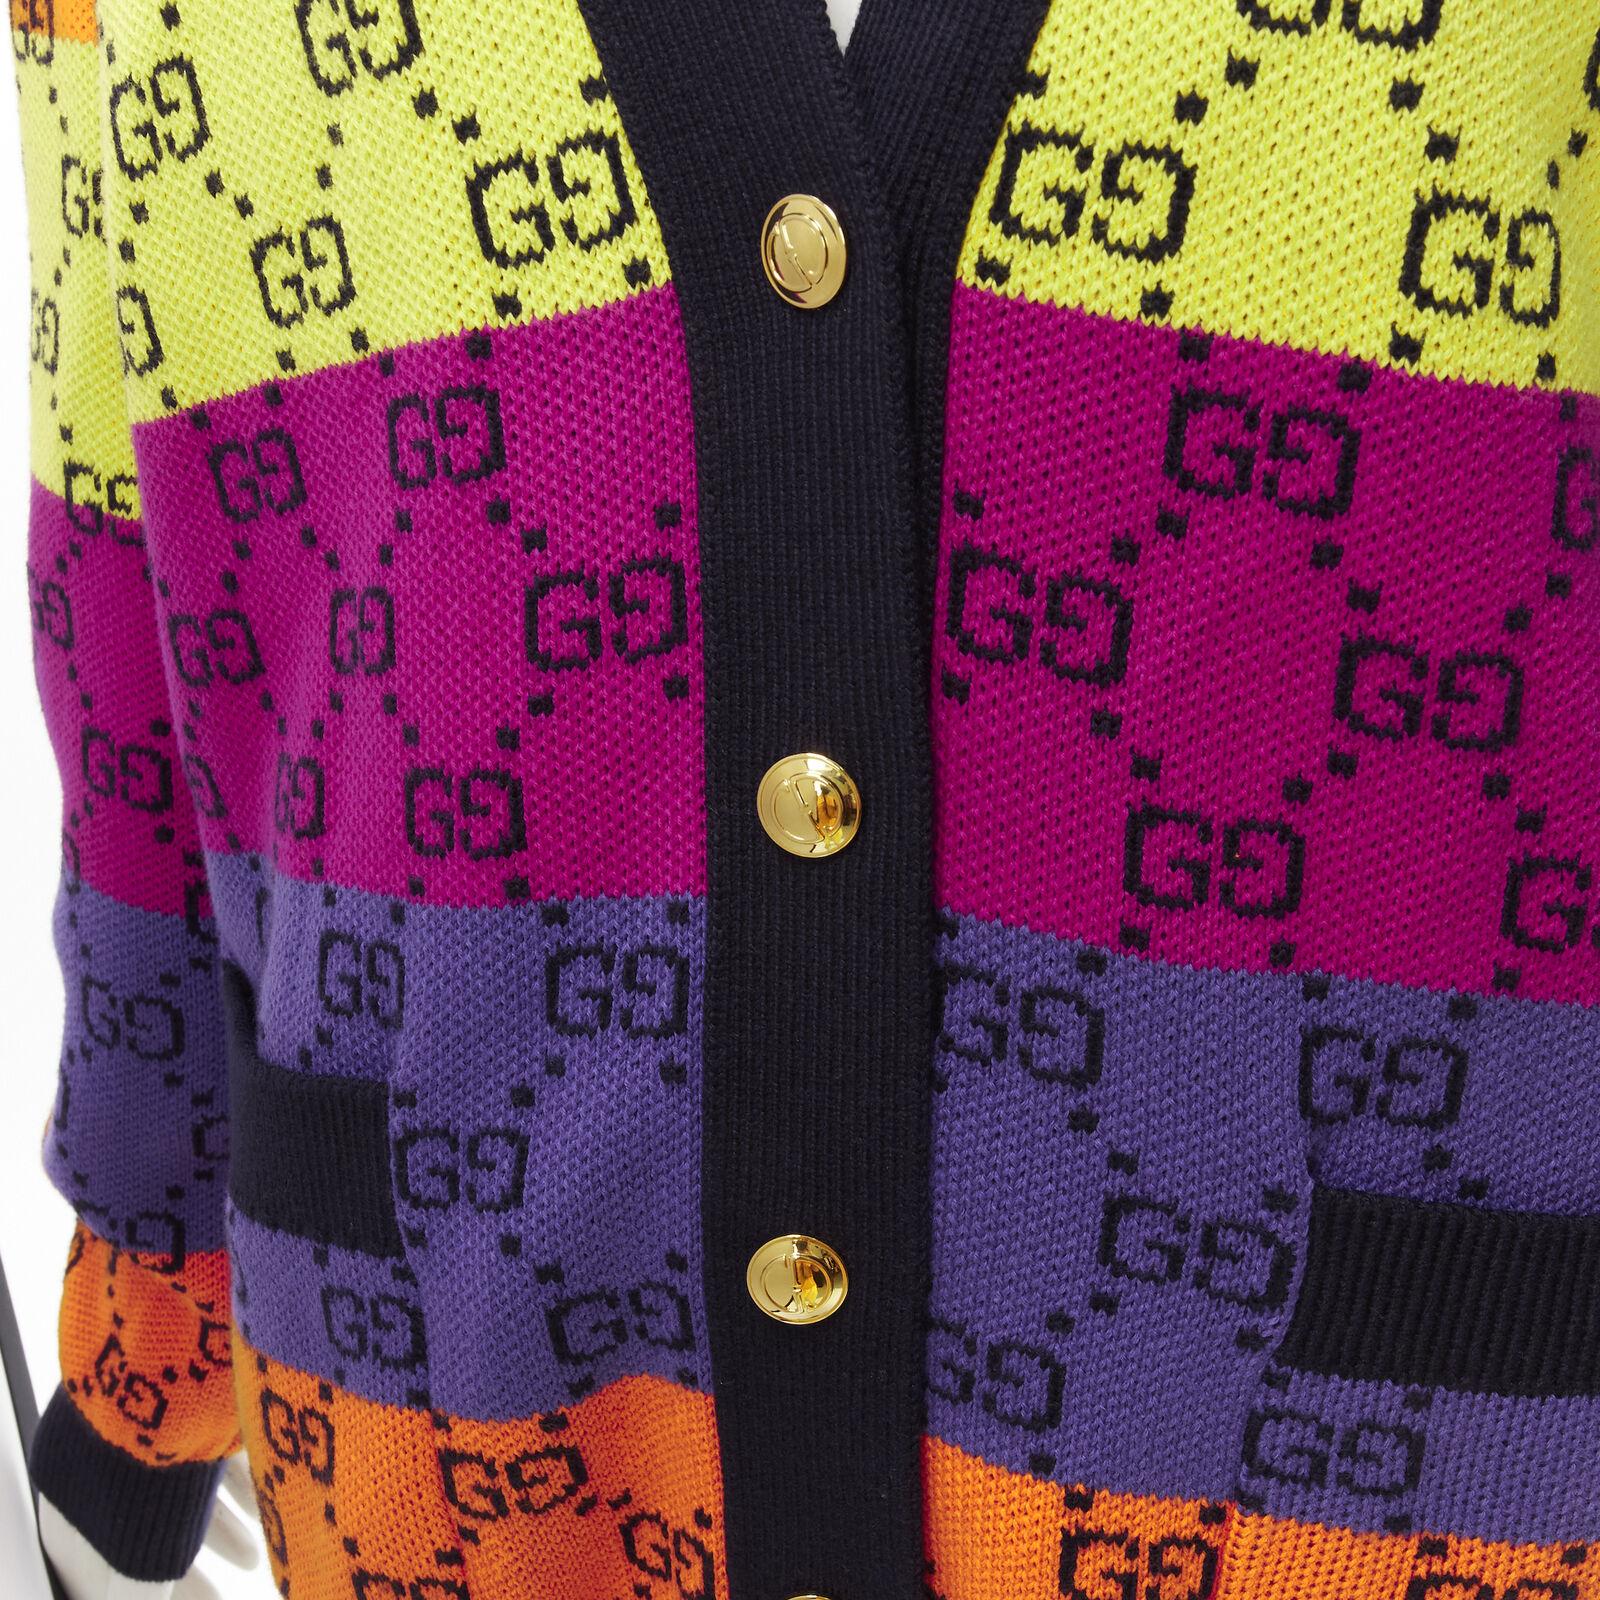 GUCCI wool cotton colorblocked GG monogram gld button oversized cardigan XS
Reference: AAWC/A00247
Brand: Gucci
Designer: Alessandro Michele
Material: Wool, Cotton
Color: Multicolour
Pattern: Monogram
Closure: Button
Lining: Unlined
Extra Details: